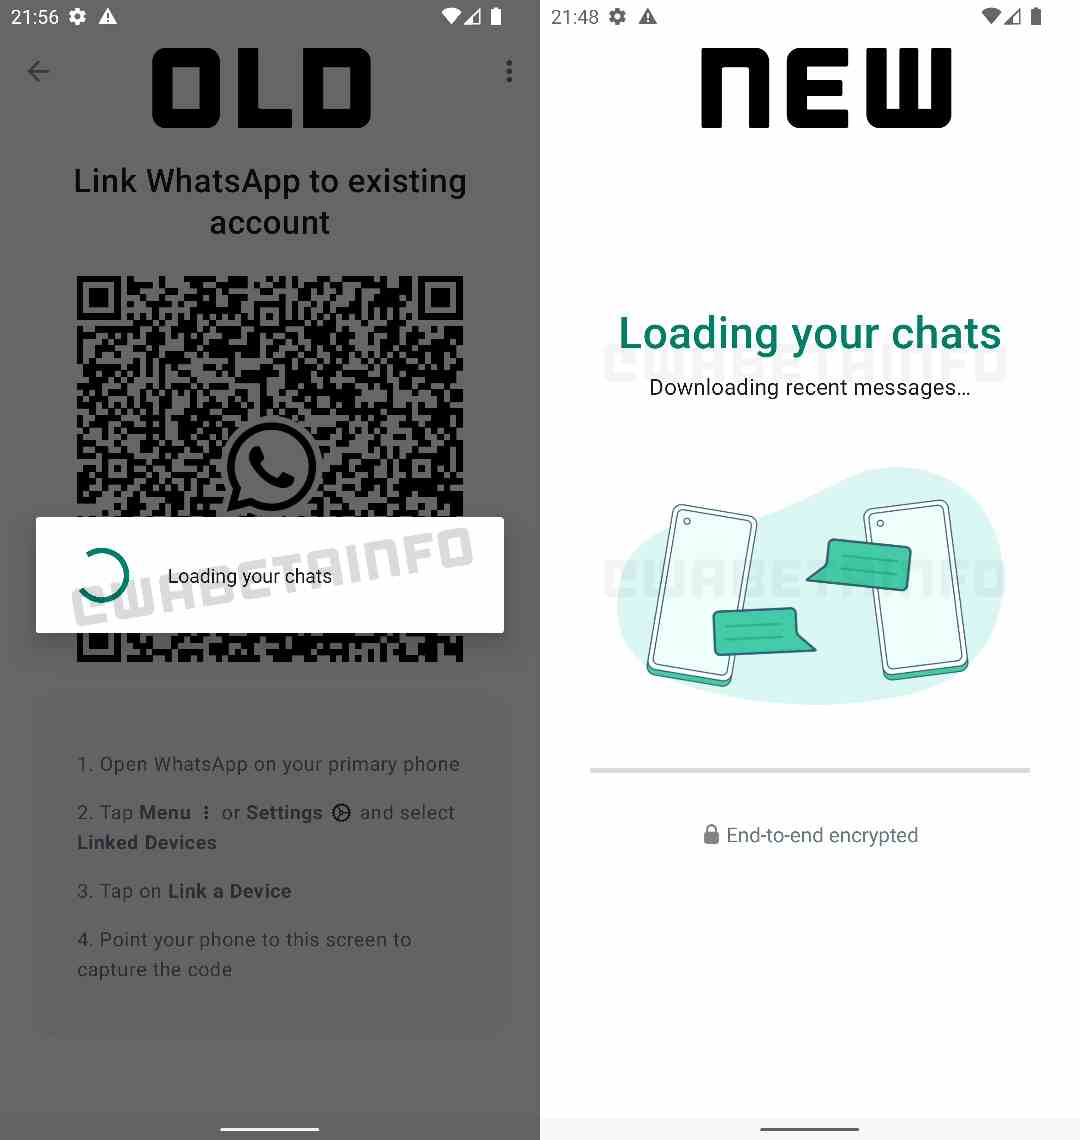 WhatsApp new Interface Loading your Chats, Image Credit: WABetaInfo